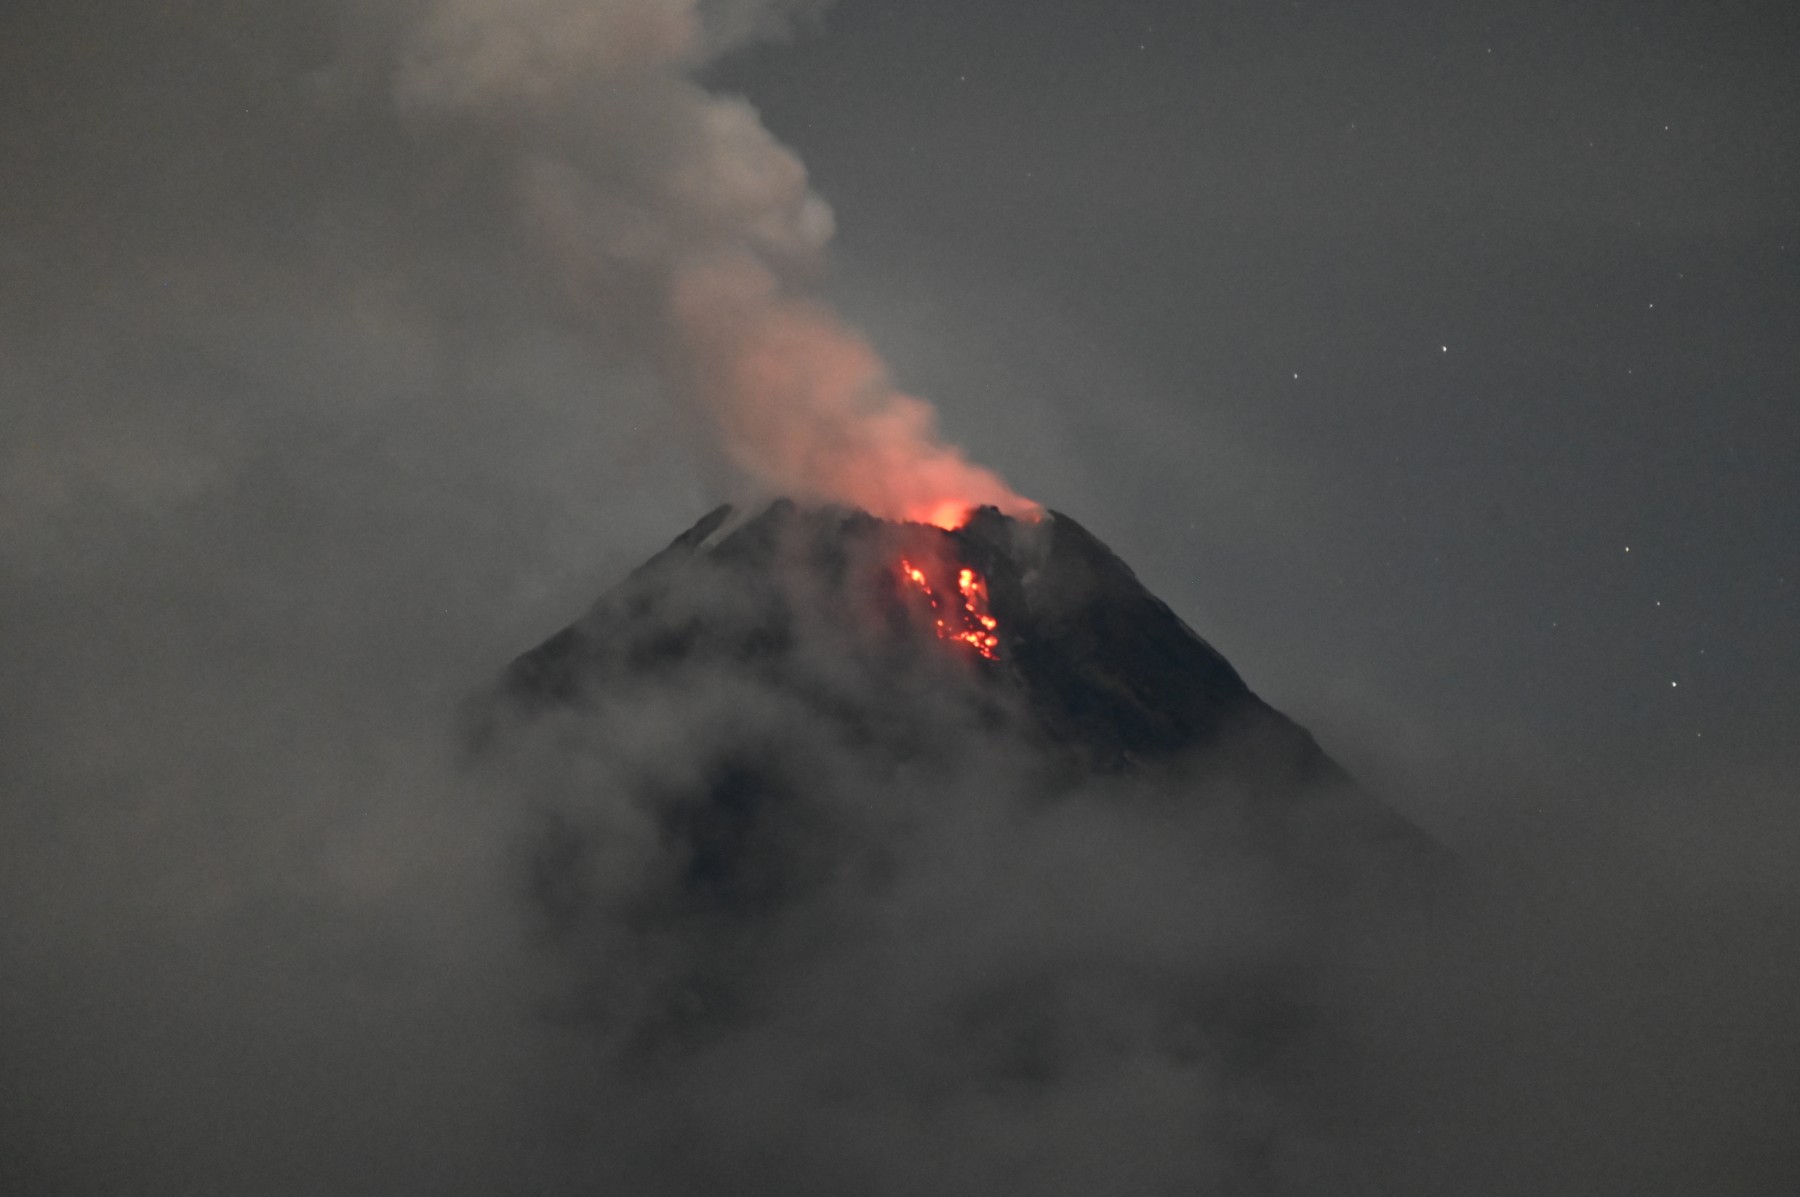 PHIVOLCS-DOST on X: LOOK: Weakening effusive activity produces a short  incandescent lava flow from the summit crater of Mayon Volcano. Photo taken  at 7:30 PM tonight, 22 November 2023, using Nikon D780 (